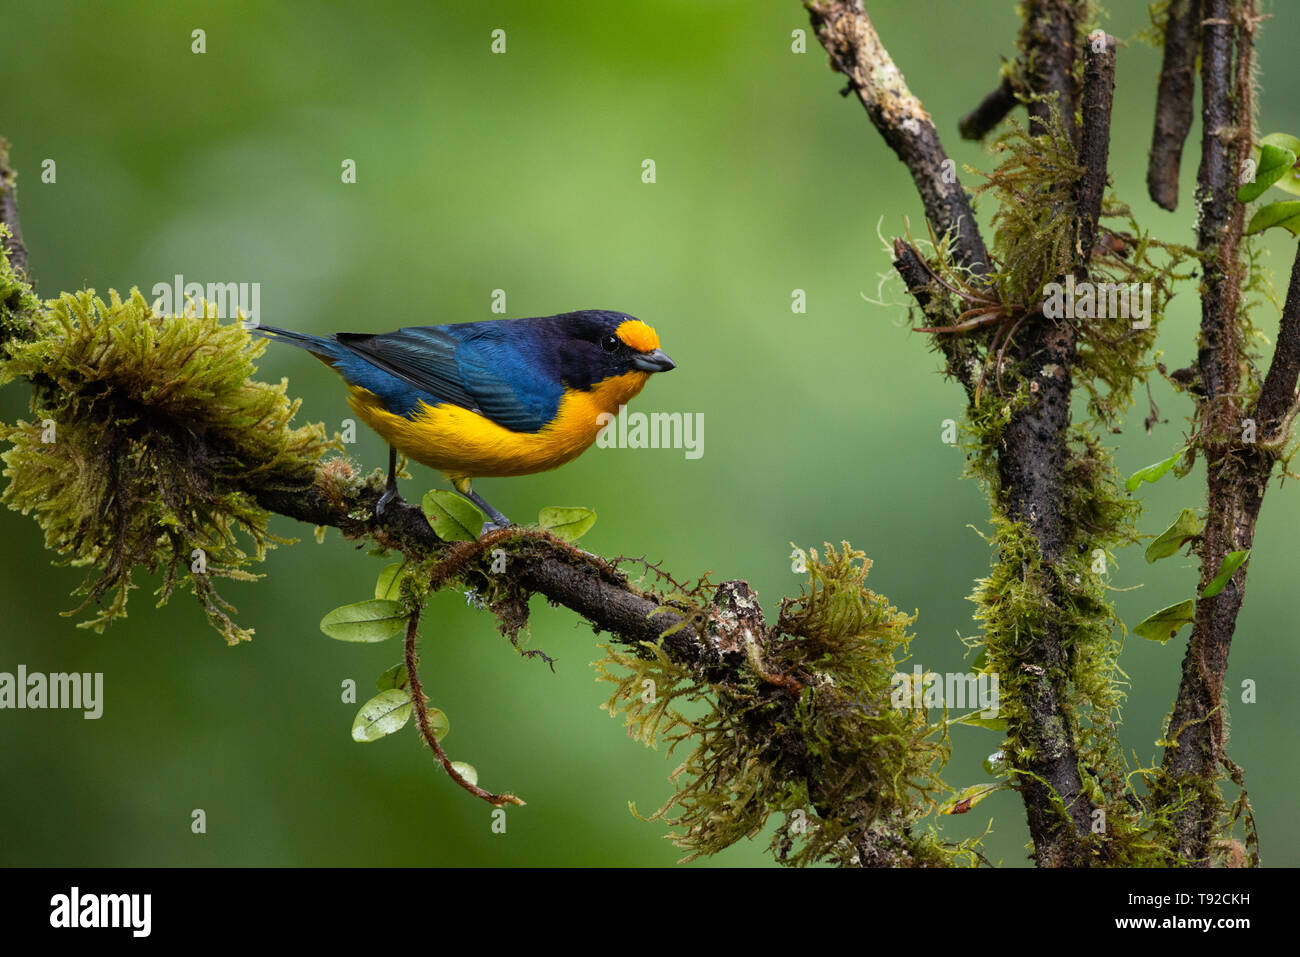 A male Violaceous Euphonia (Euphonia violacea) from the Atlantic Rainforest of SE Brazil Stock Photo